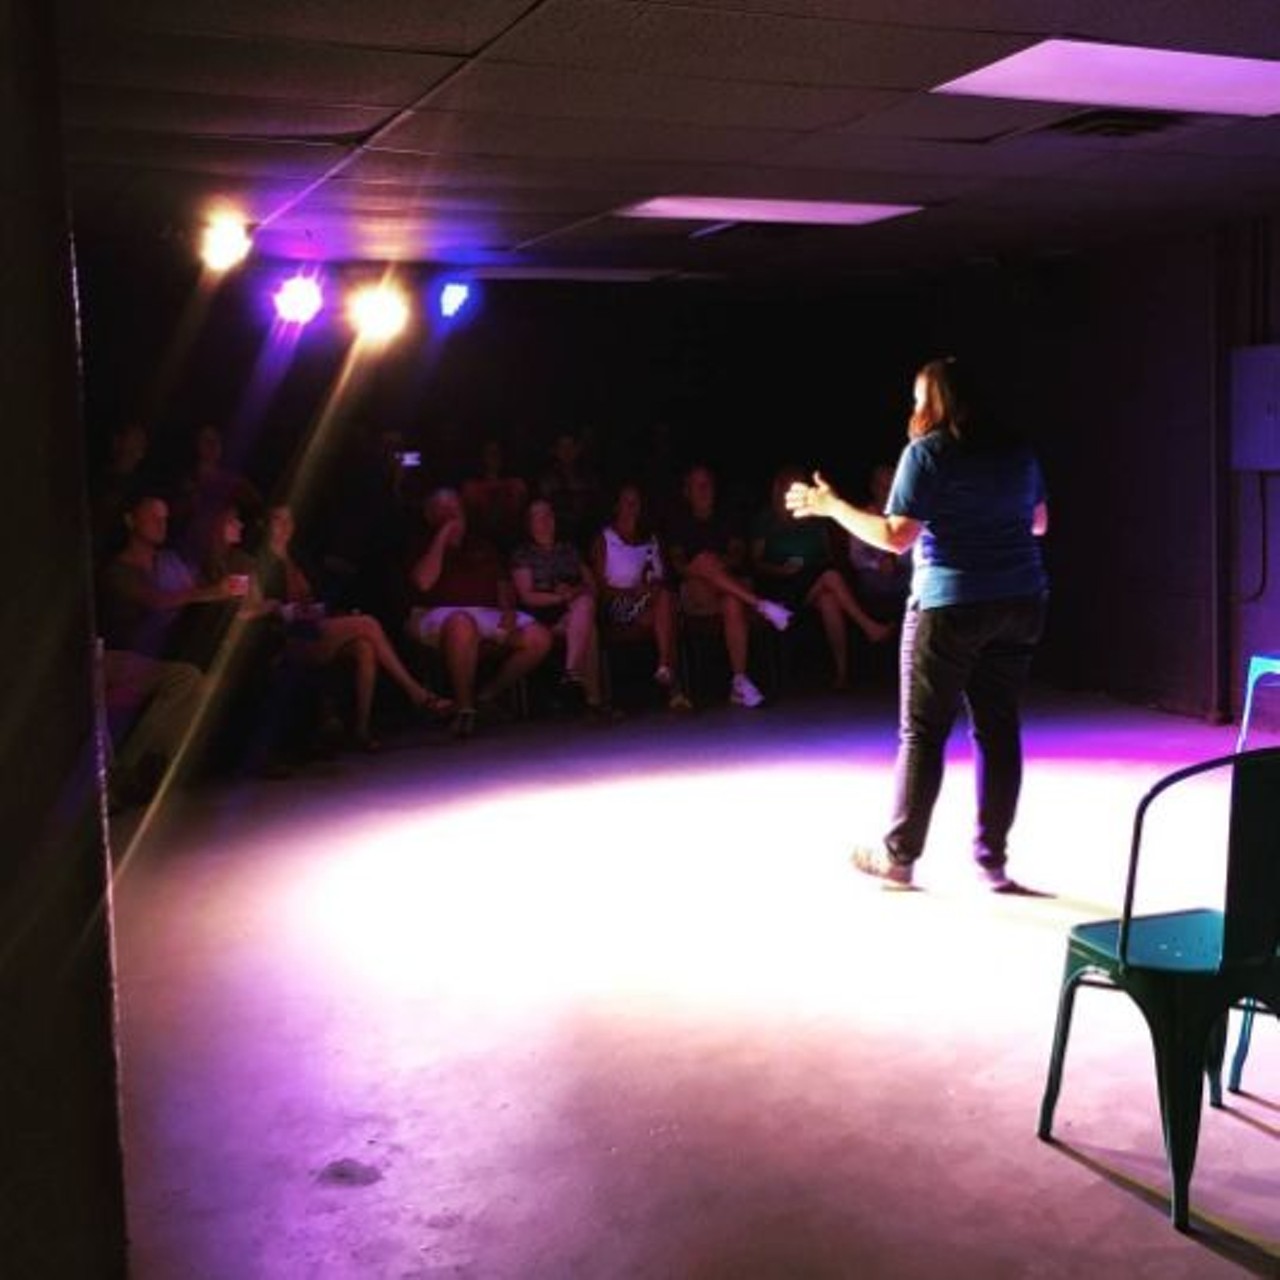 Bexar Stage 
1203 Camden St., (312) 971-7252 
Visit Bexar Stage on Thursday nights (8 p.m.) for a completely improvised BYOB show.
Photo via Instagram, teejaxling